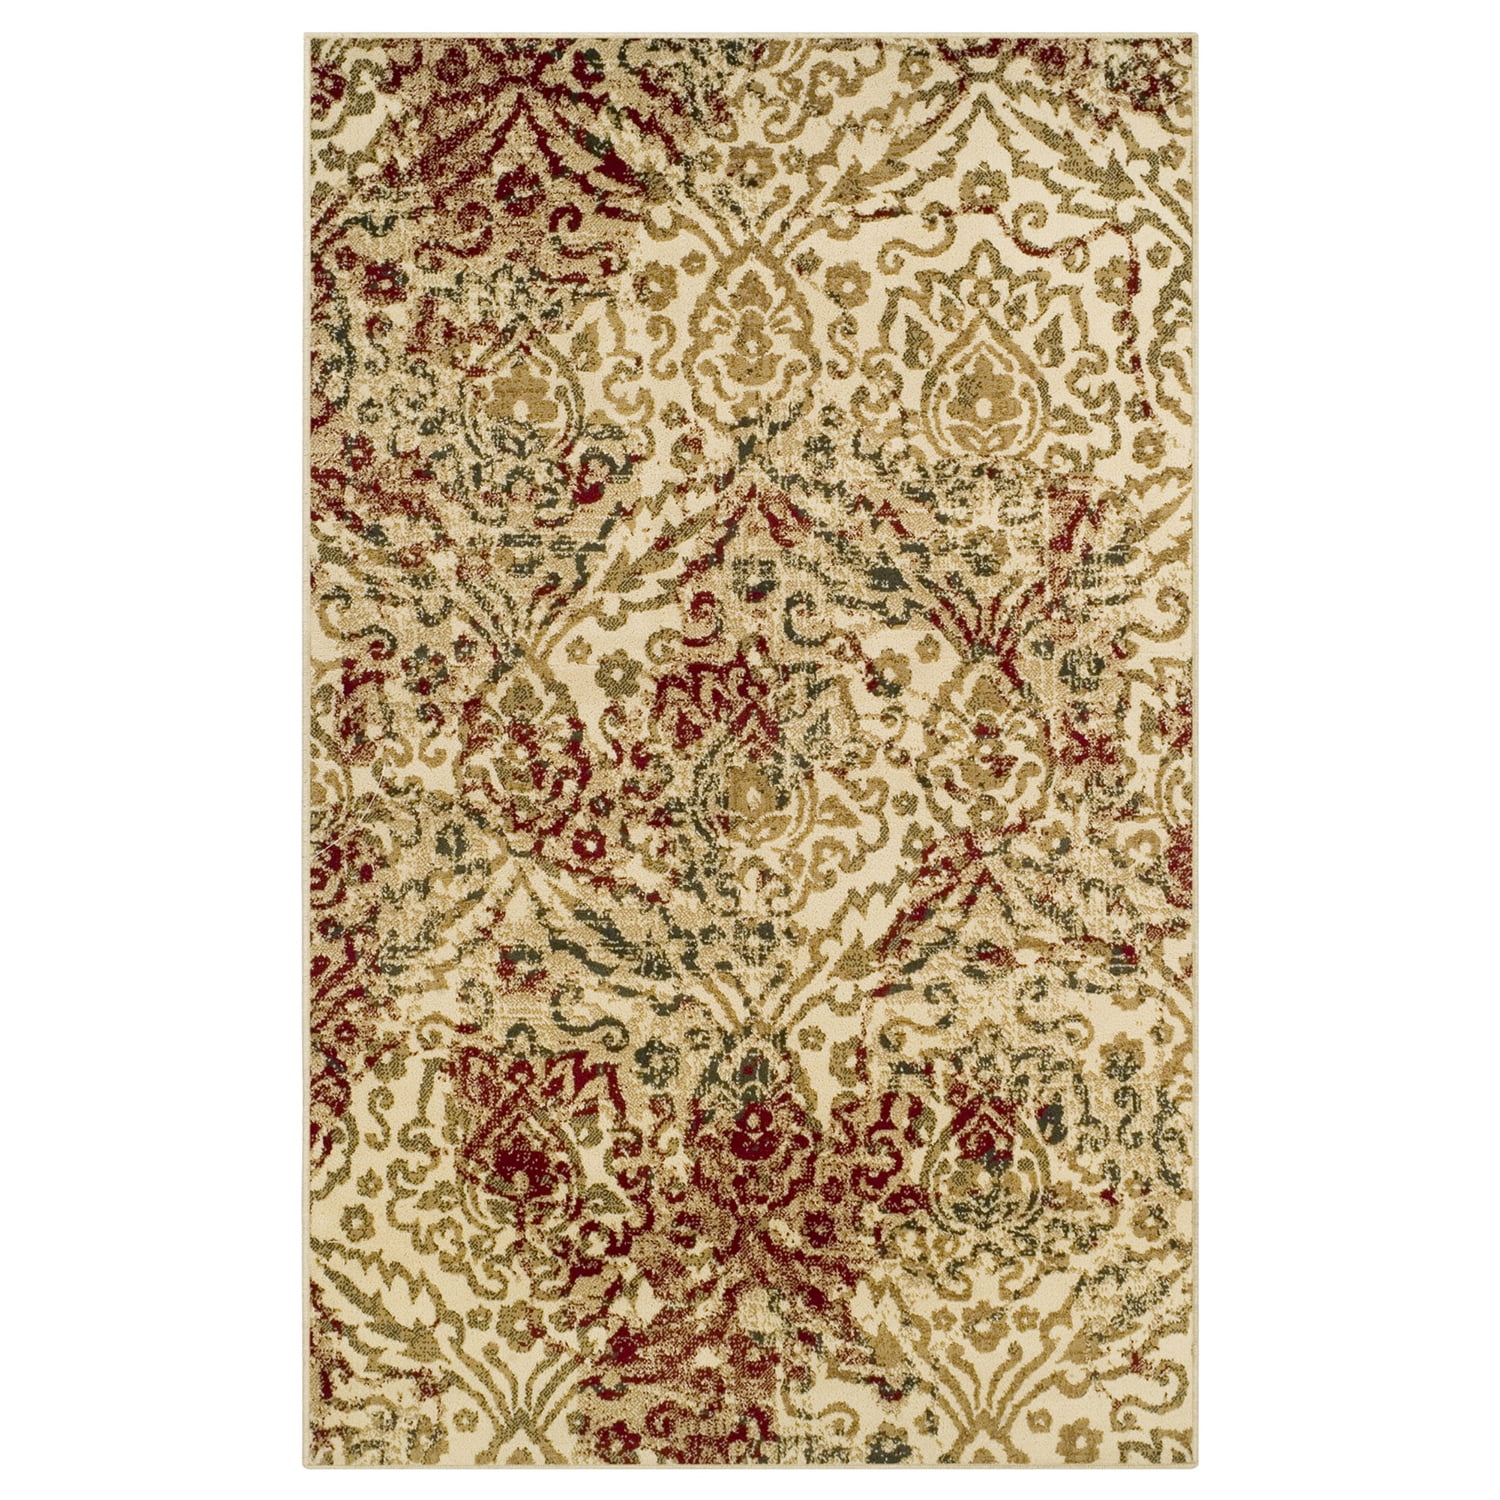 Gold 2 x 3 Rug 10mm Pile with Jute Backing Superior Fleur de Lis Collection Elegant Scrolling Damask Pattern Affordable Contemporary Area Rugs